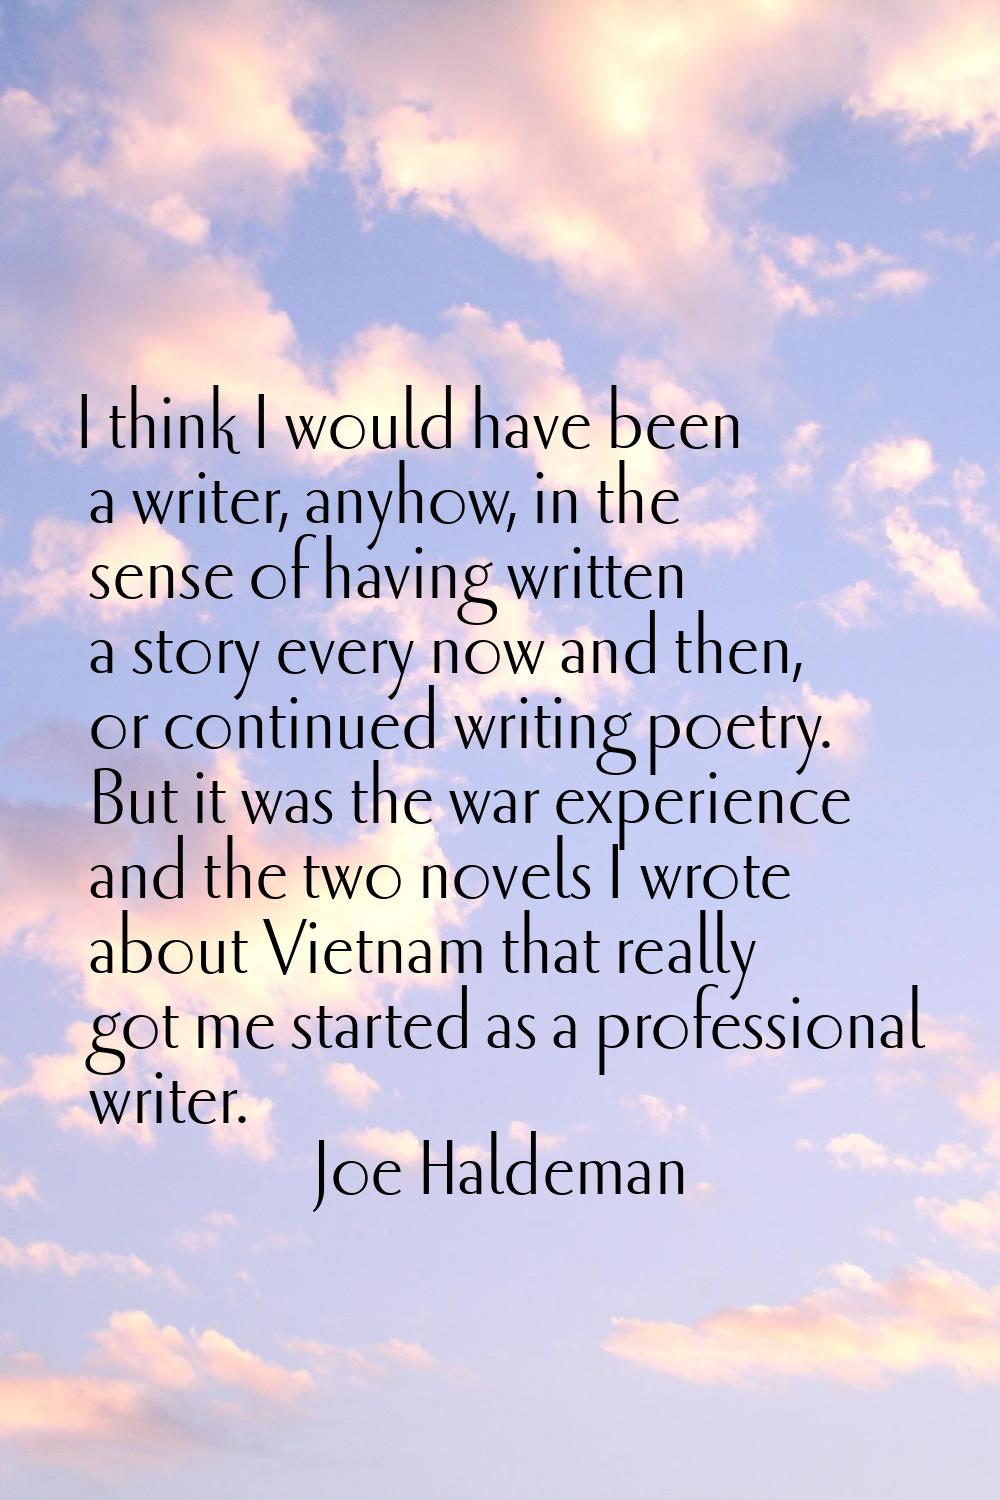 I think I would have been a writer, anyhow, in the sense of having written a story every now and th